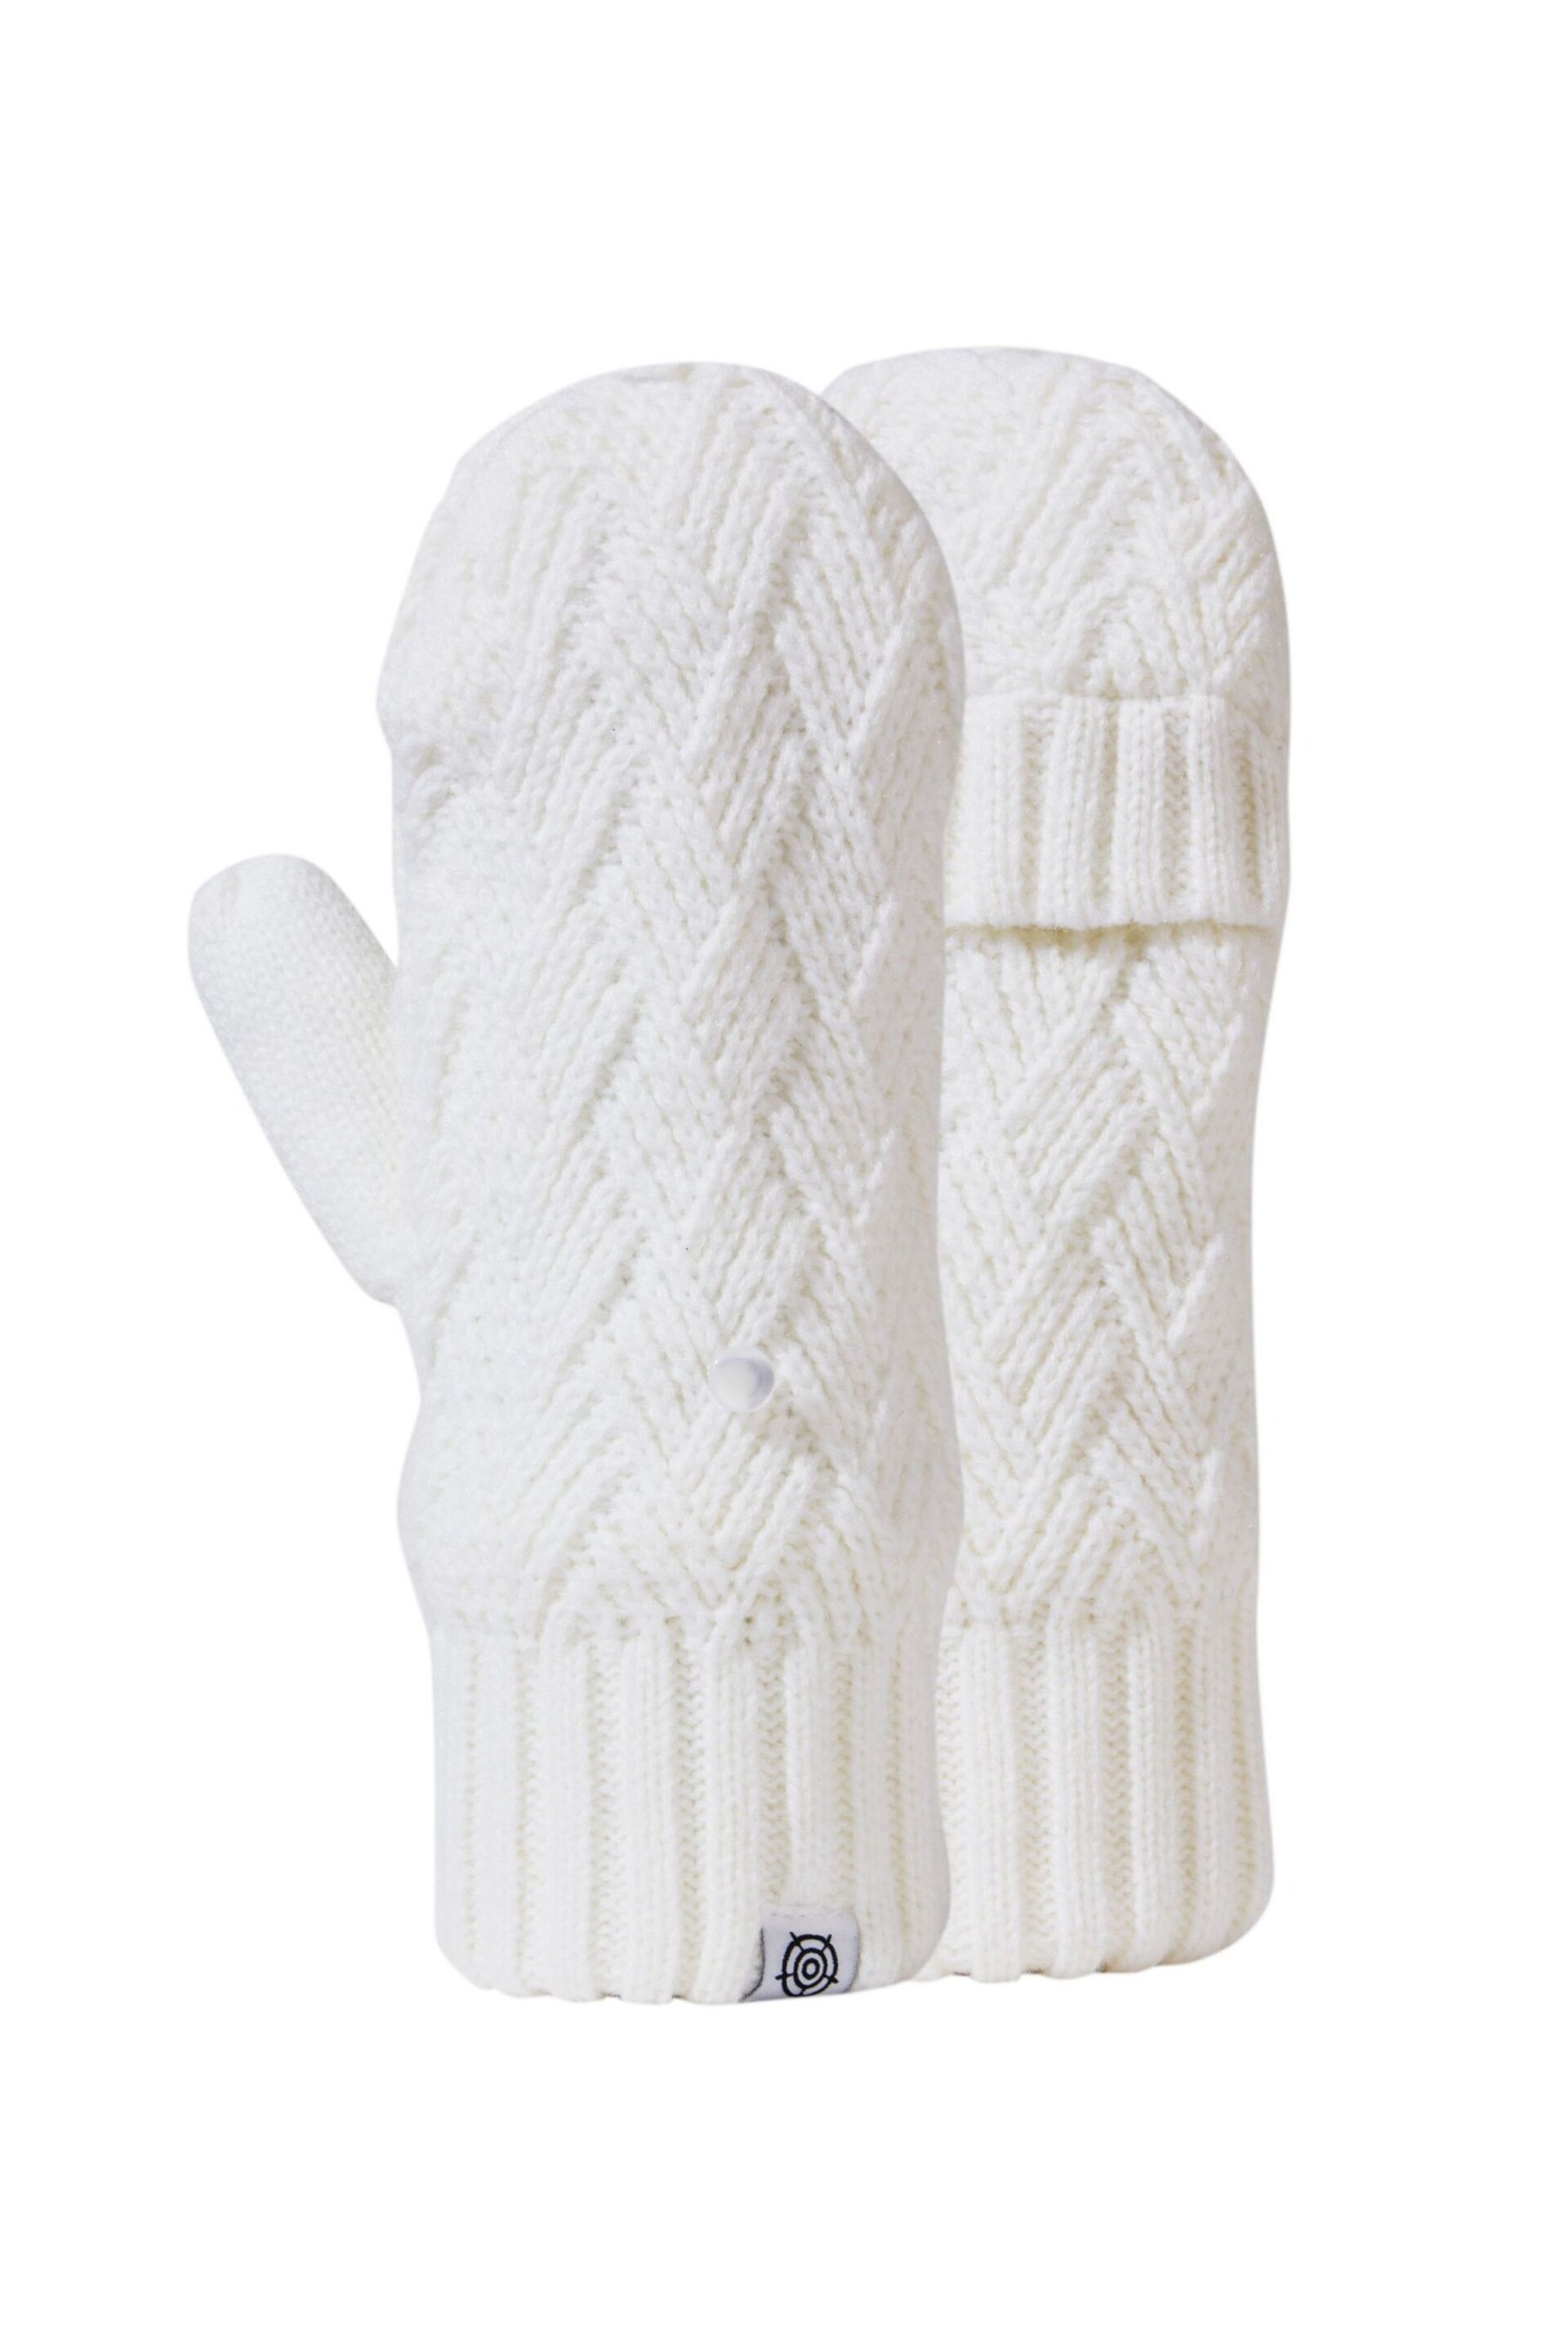 Tog 24 Off White Britton Lined Mittens - Image 1 of 2